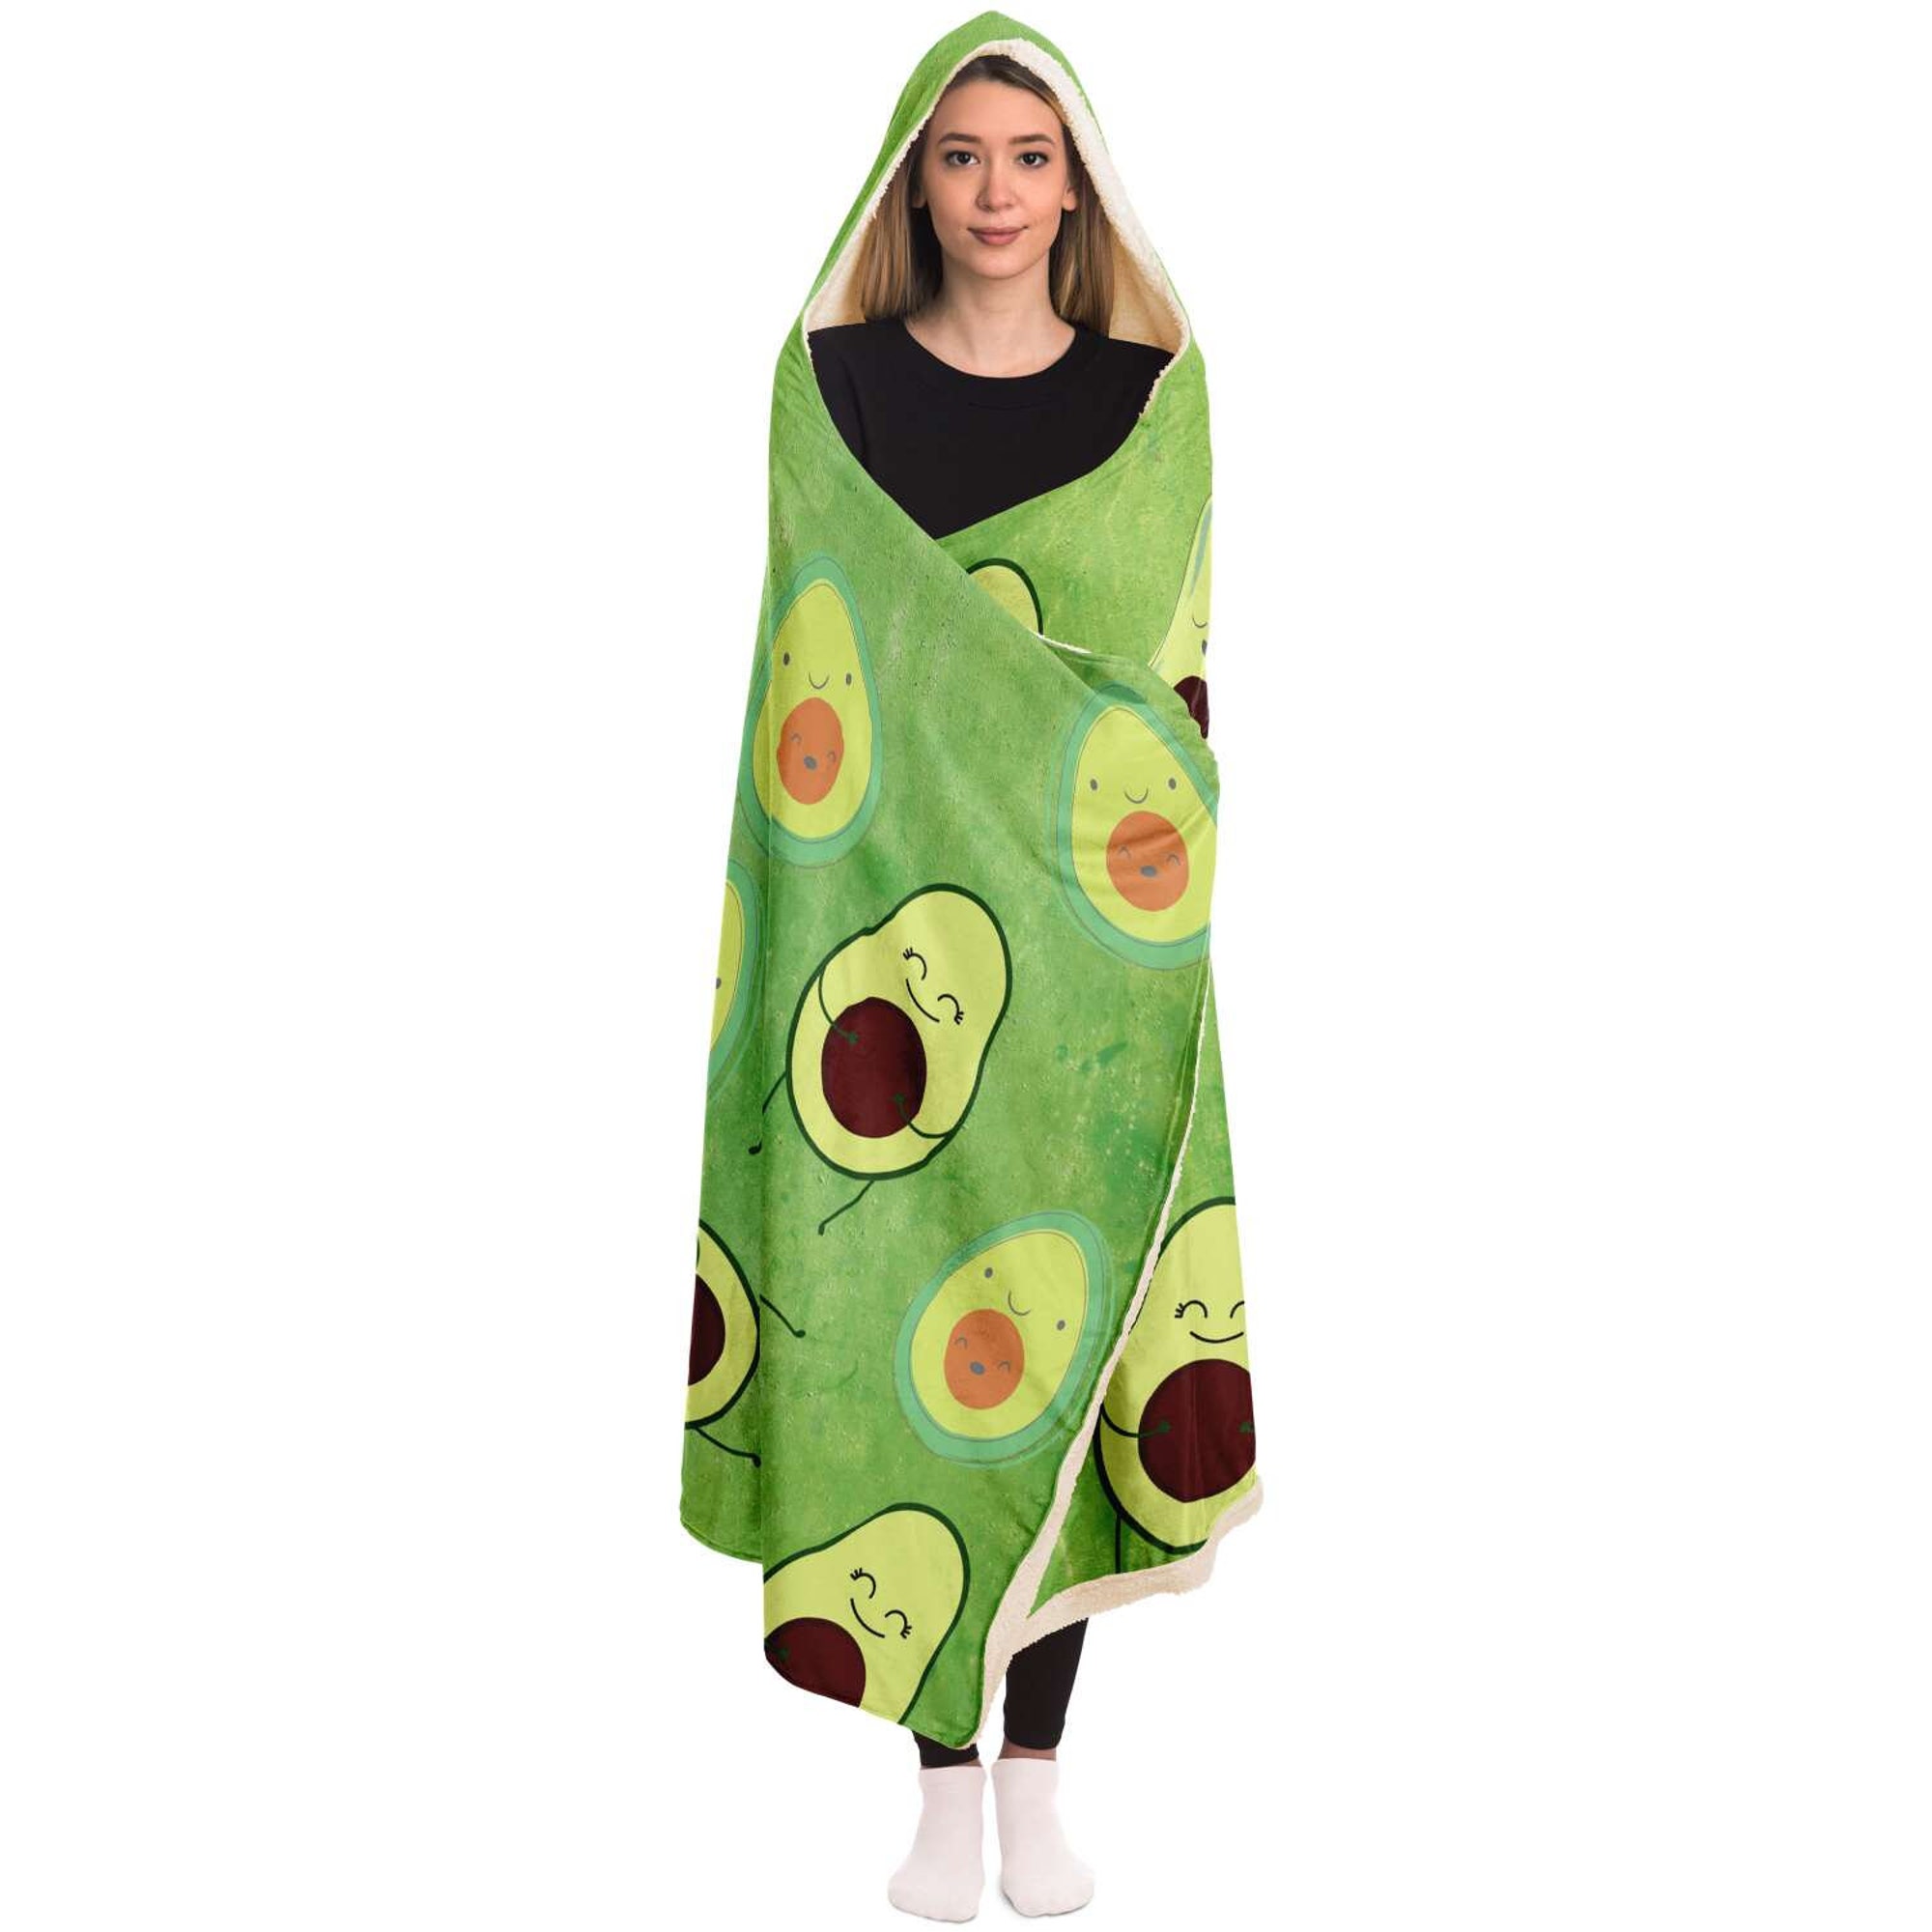 Matching Avocados Hooded Blanket